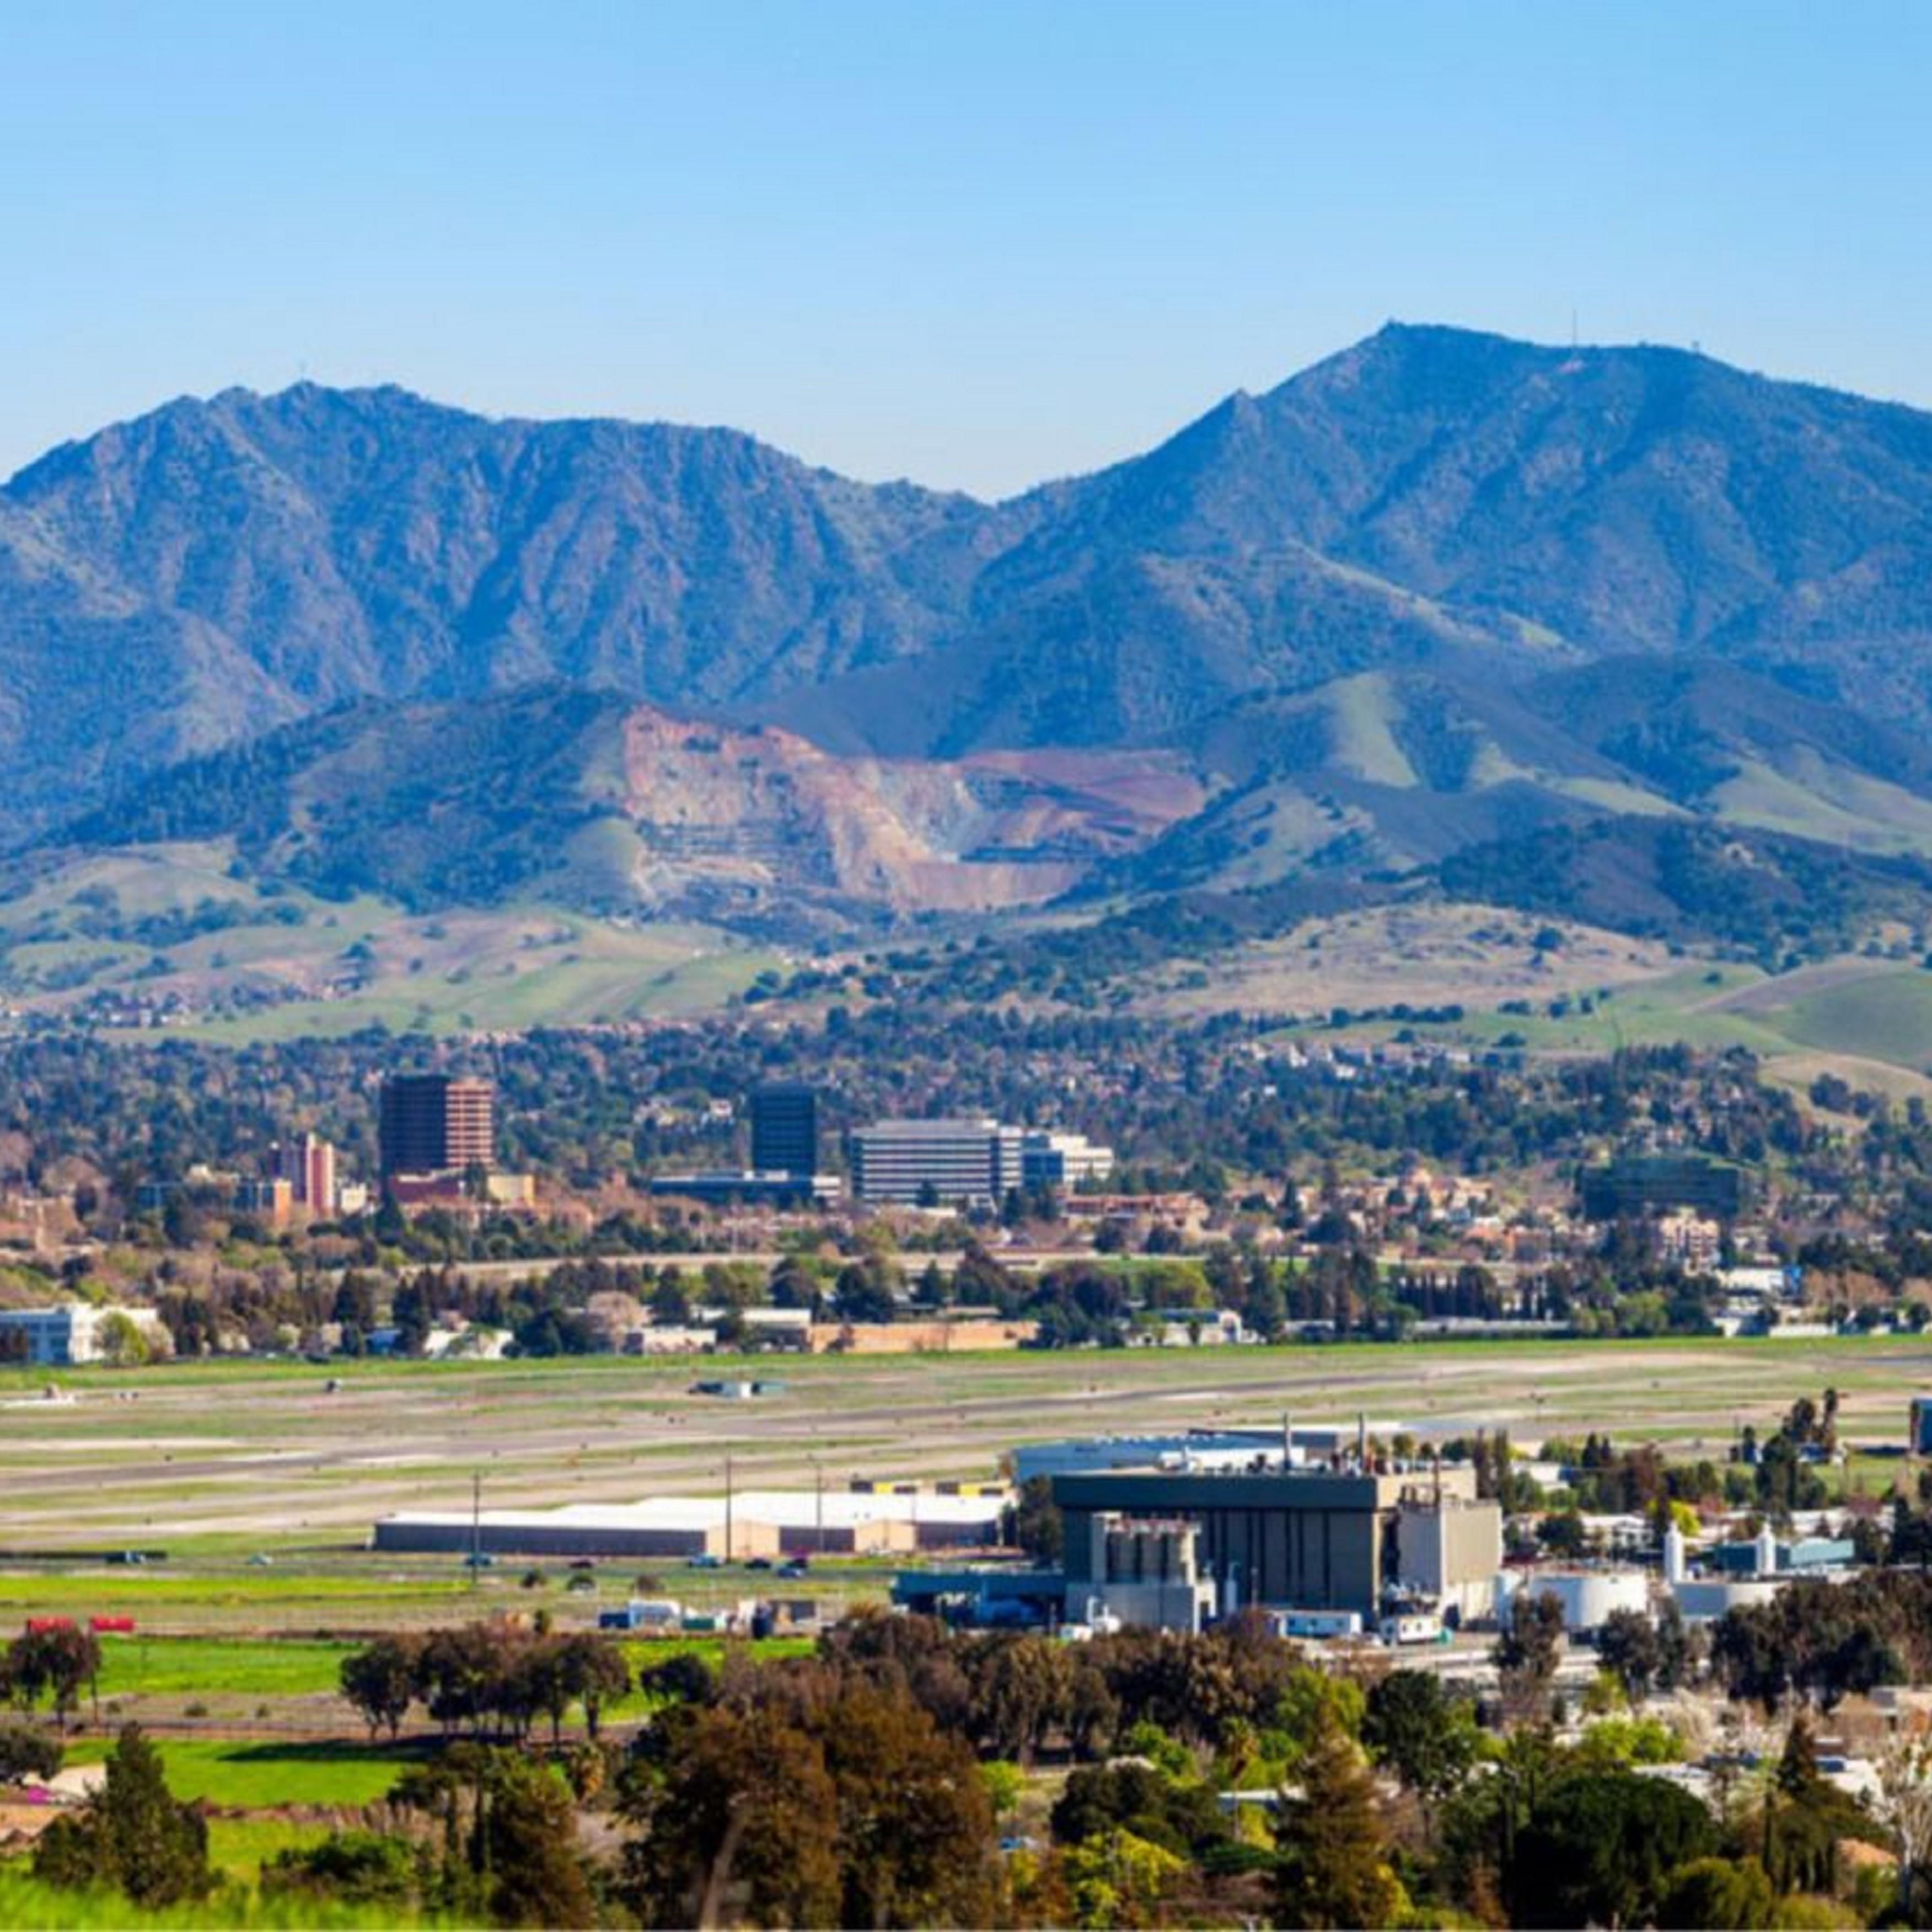 Take in scenic views of Mt. Diablo while staying in Concord.